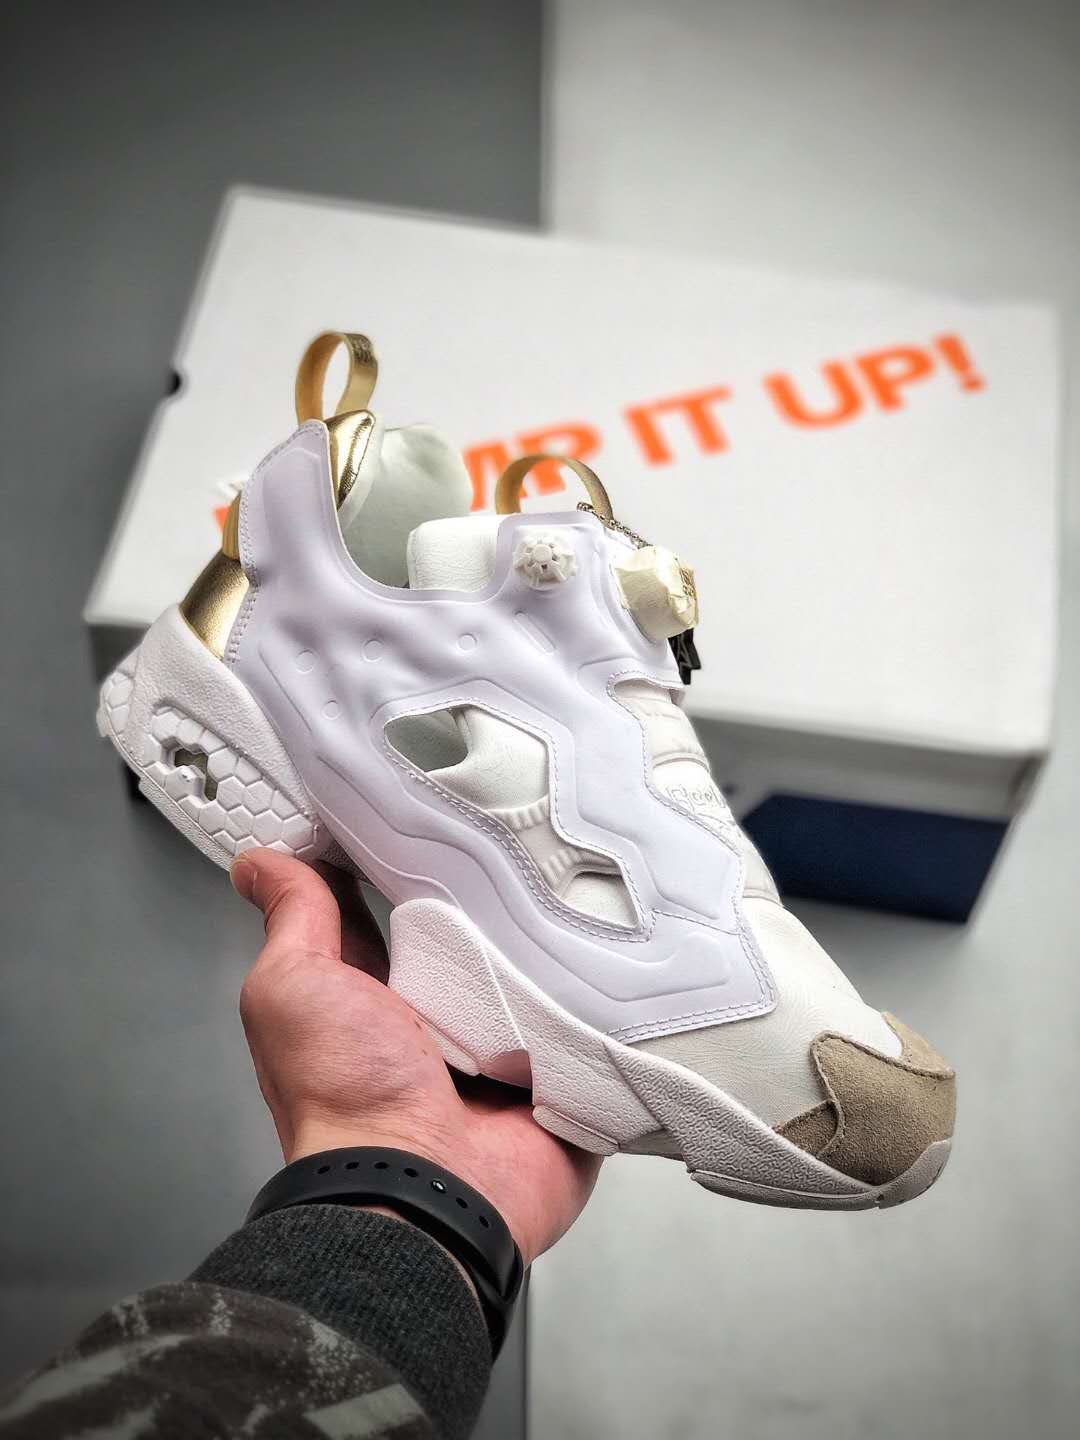 Reebok Instapump Fury PM - V62777: Stylish and Comfortable Sneakers